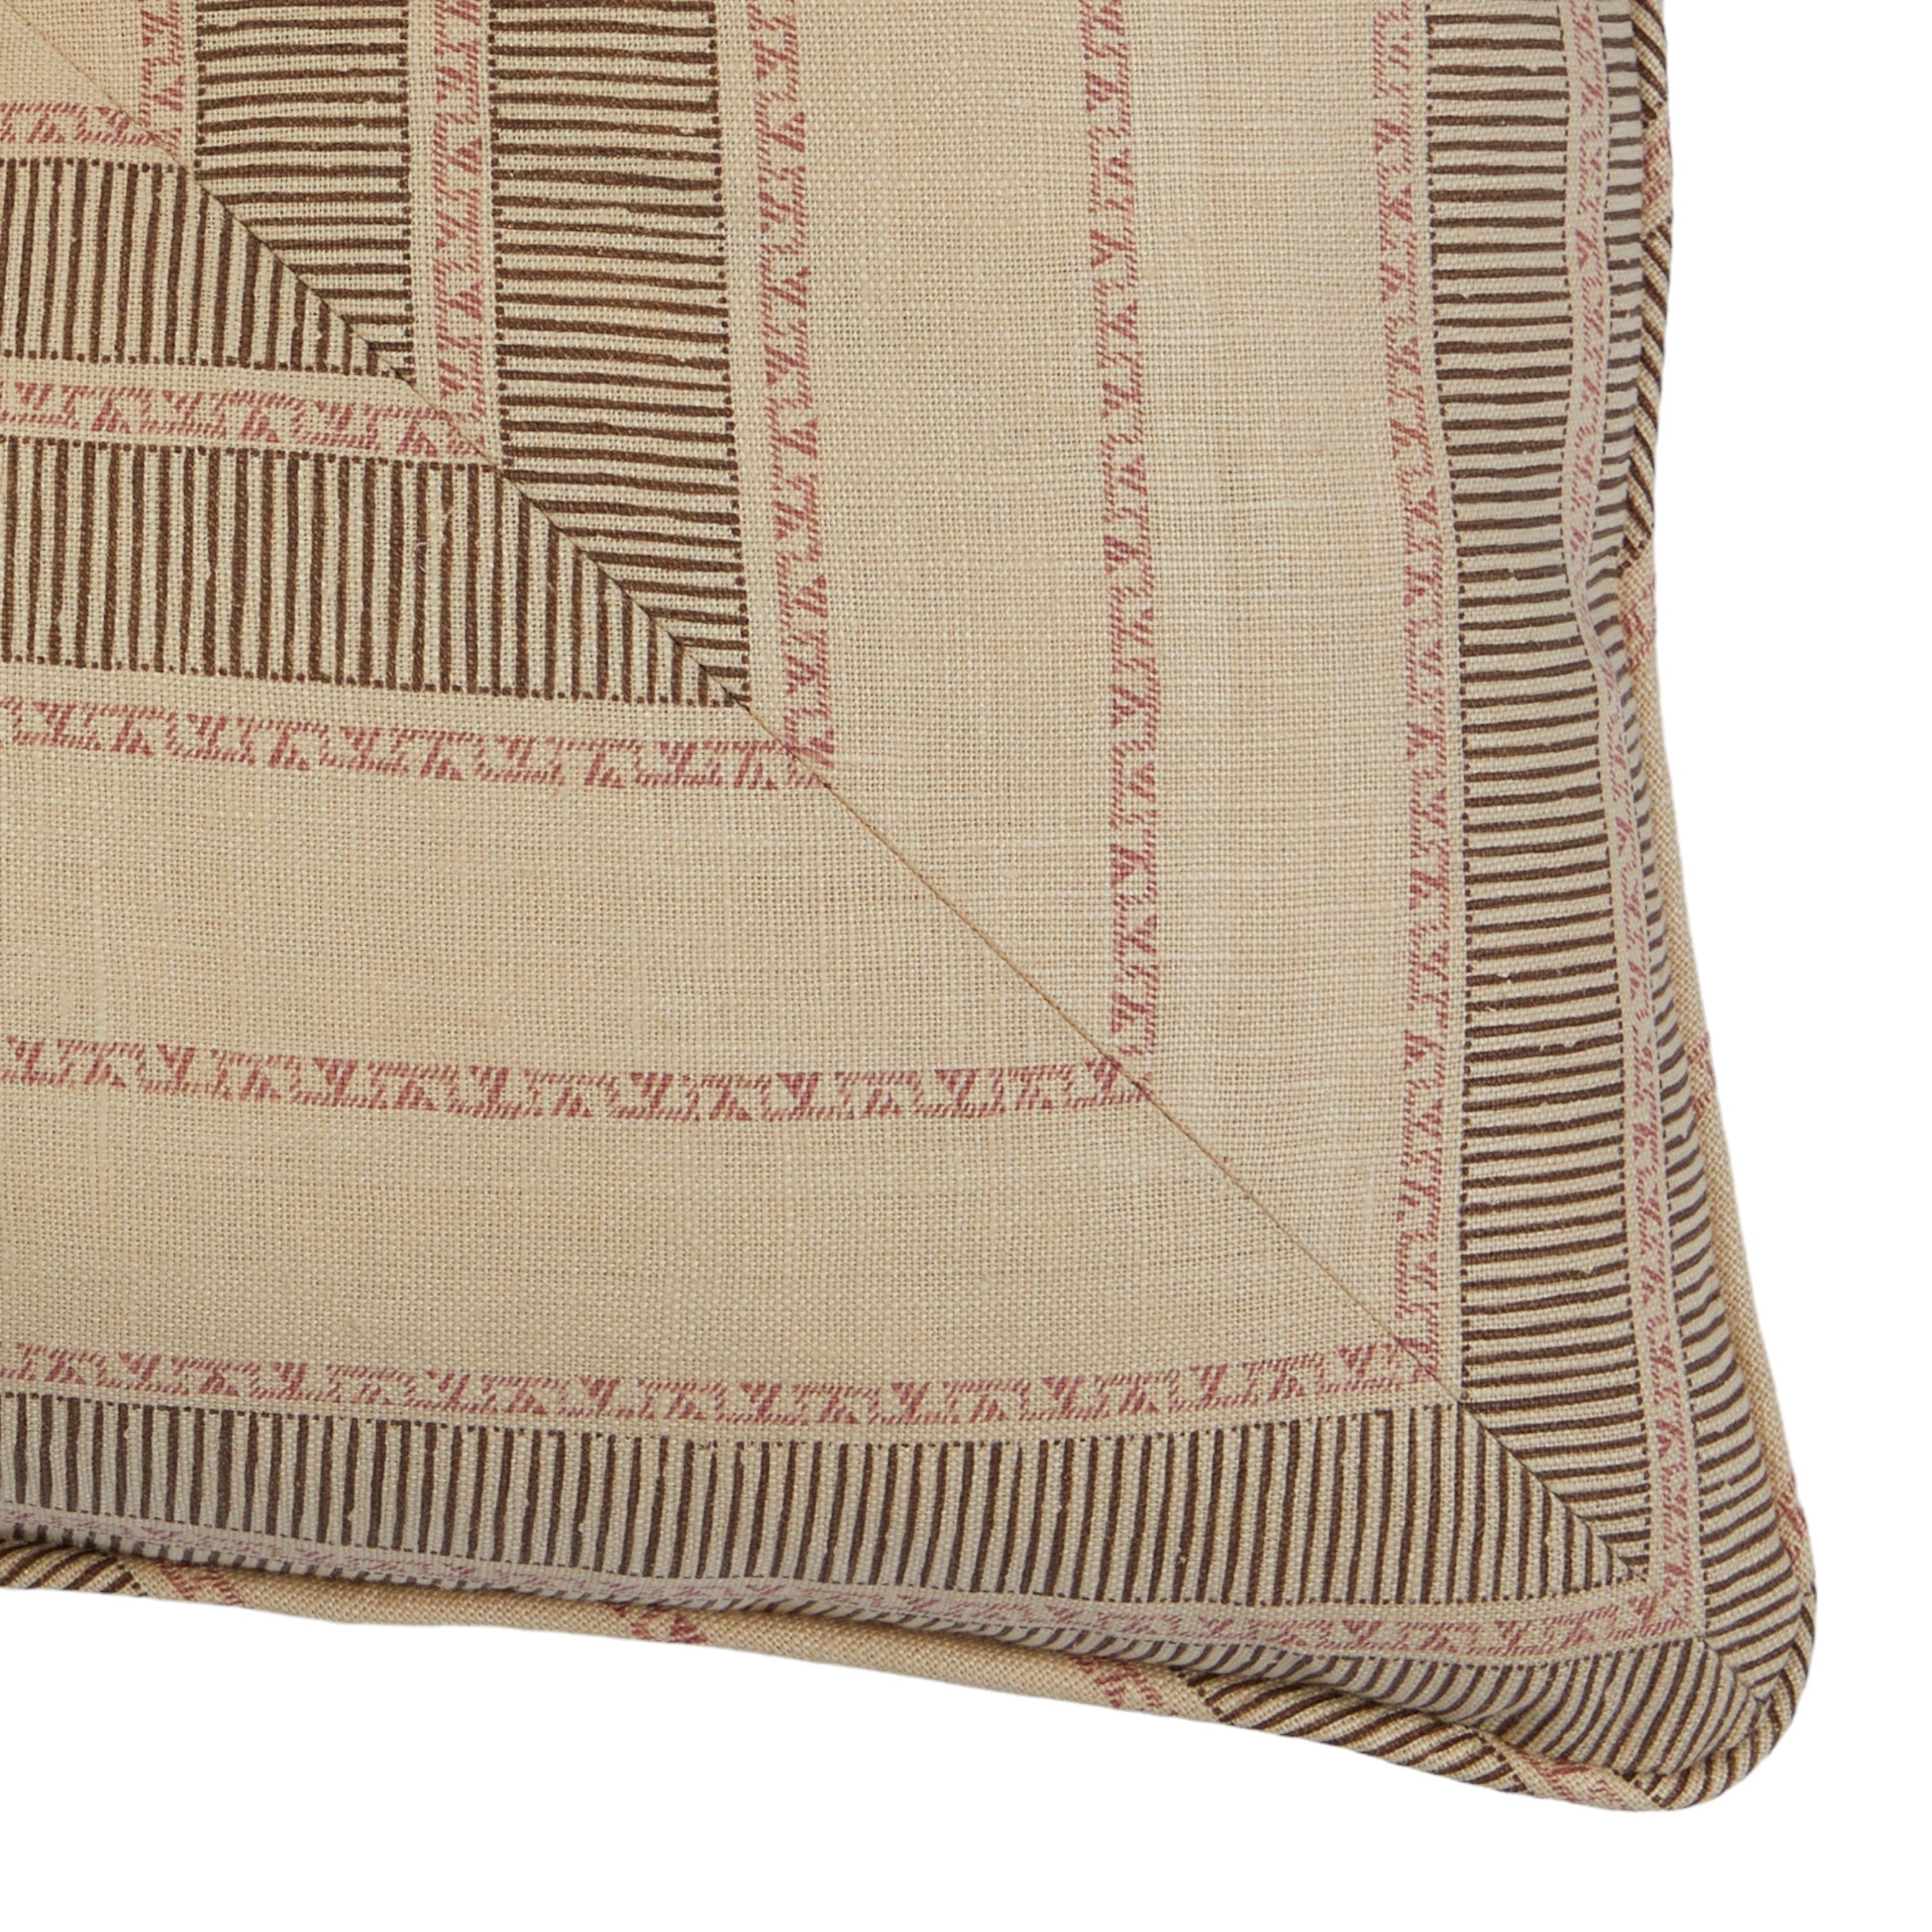 Sifnos Peat Buttoned Envelope Cushion